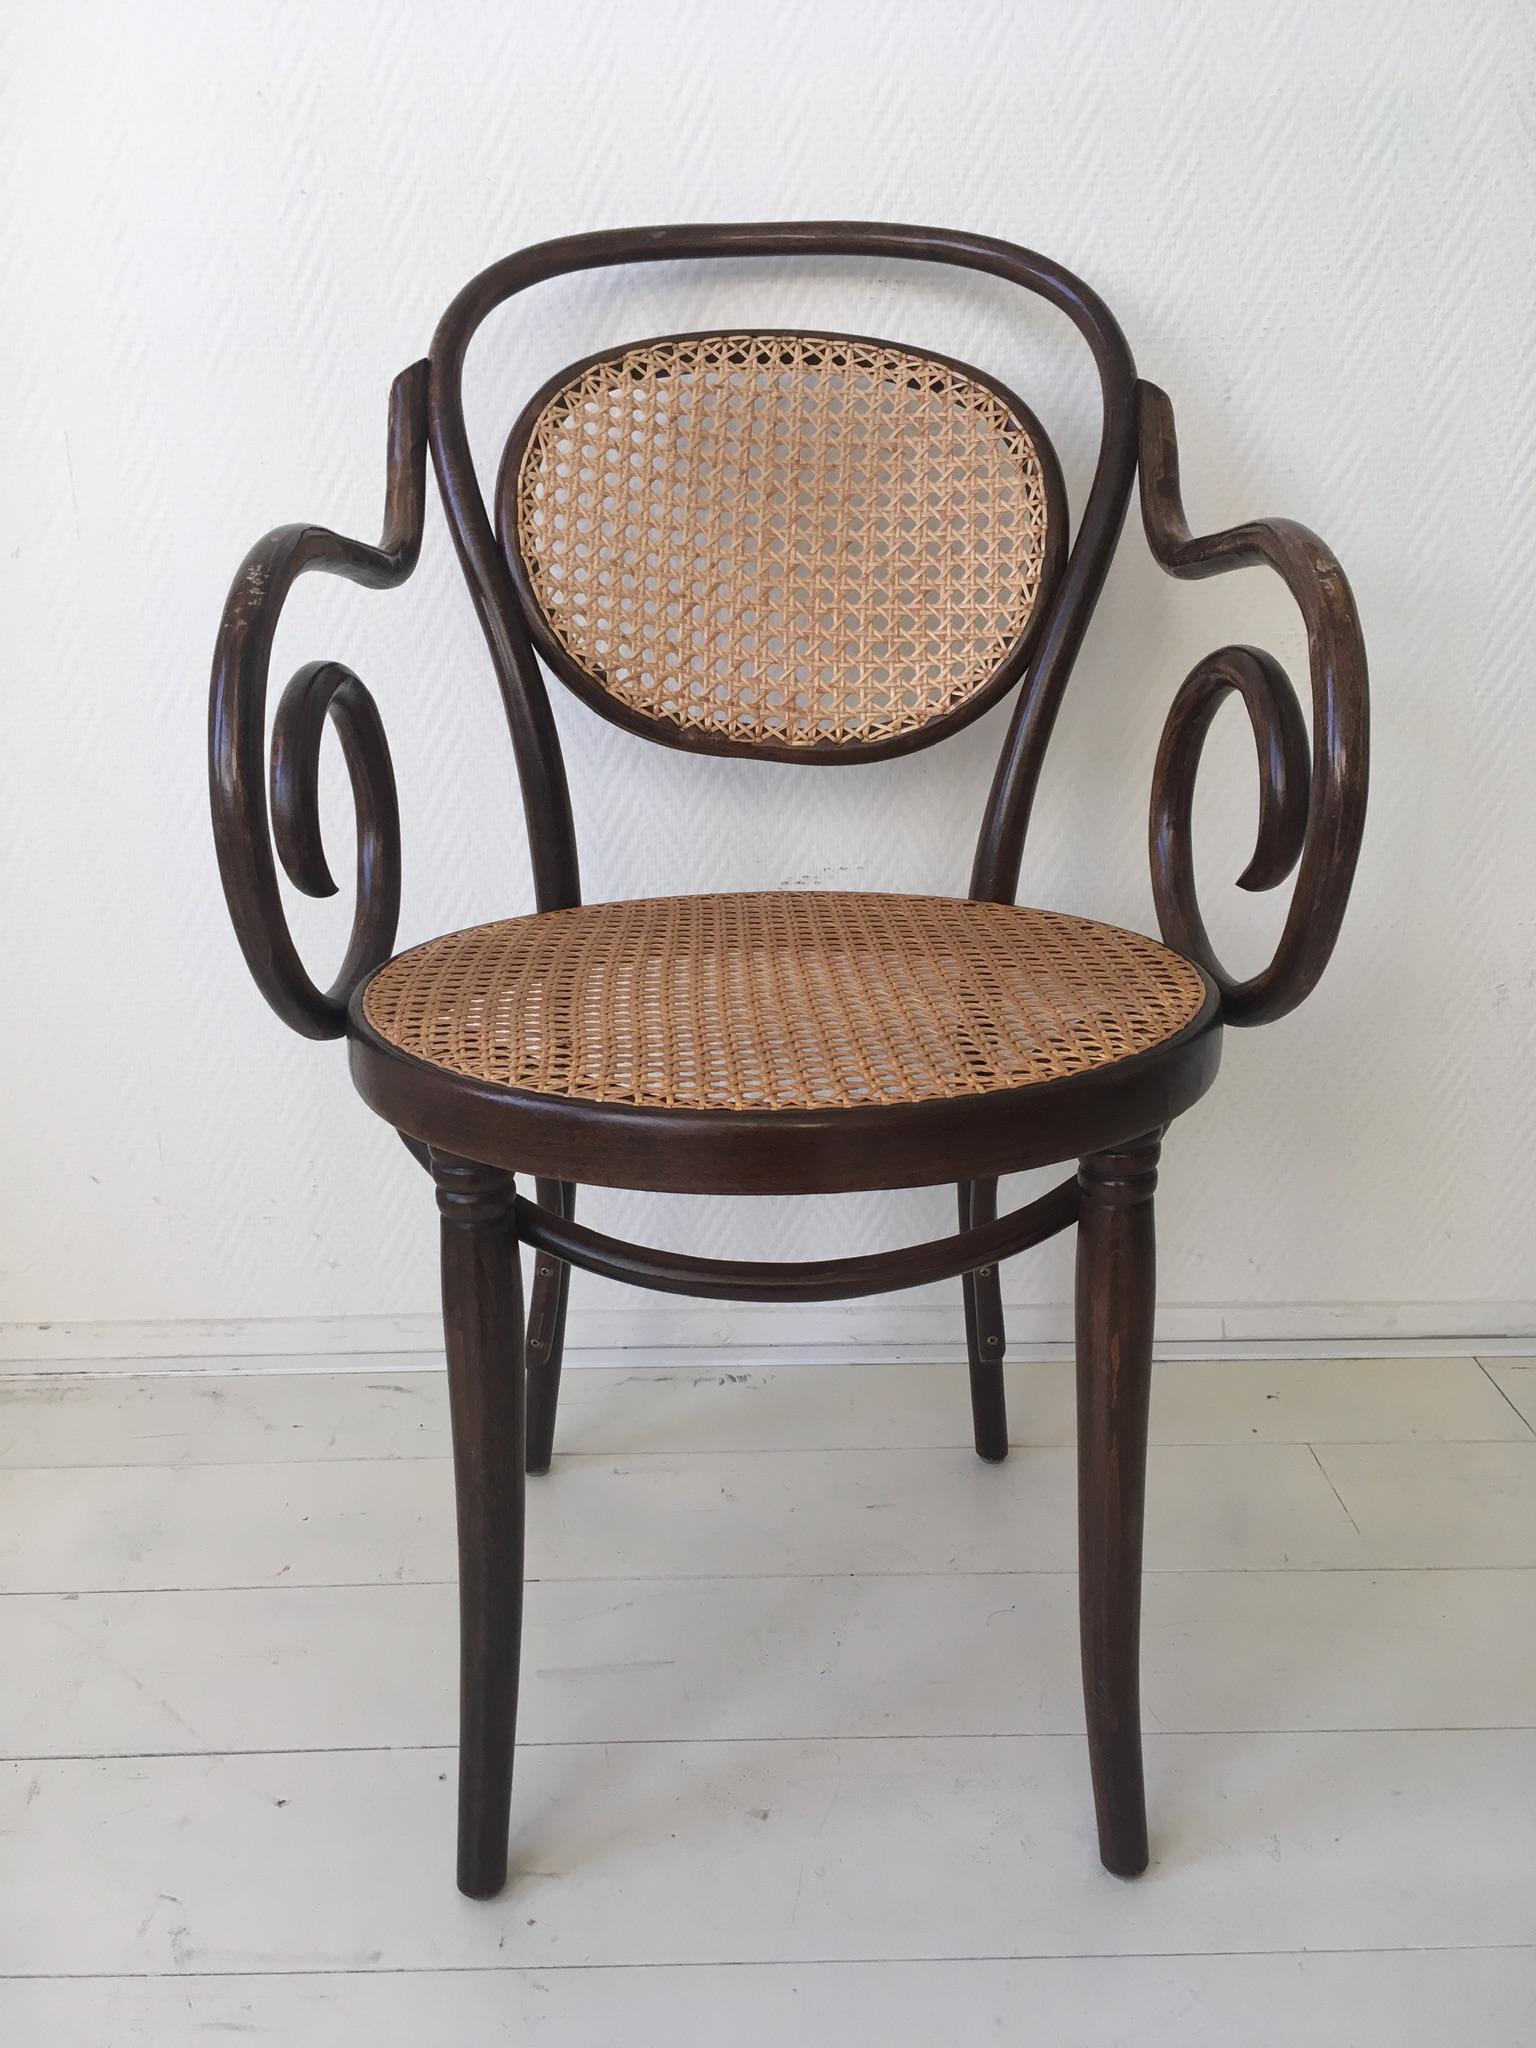 Polish ZPM Radomsko, Former Thonet, No. 11 Bentwood and Rattan Dining Room Chairs